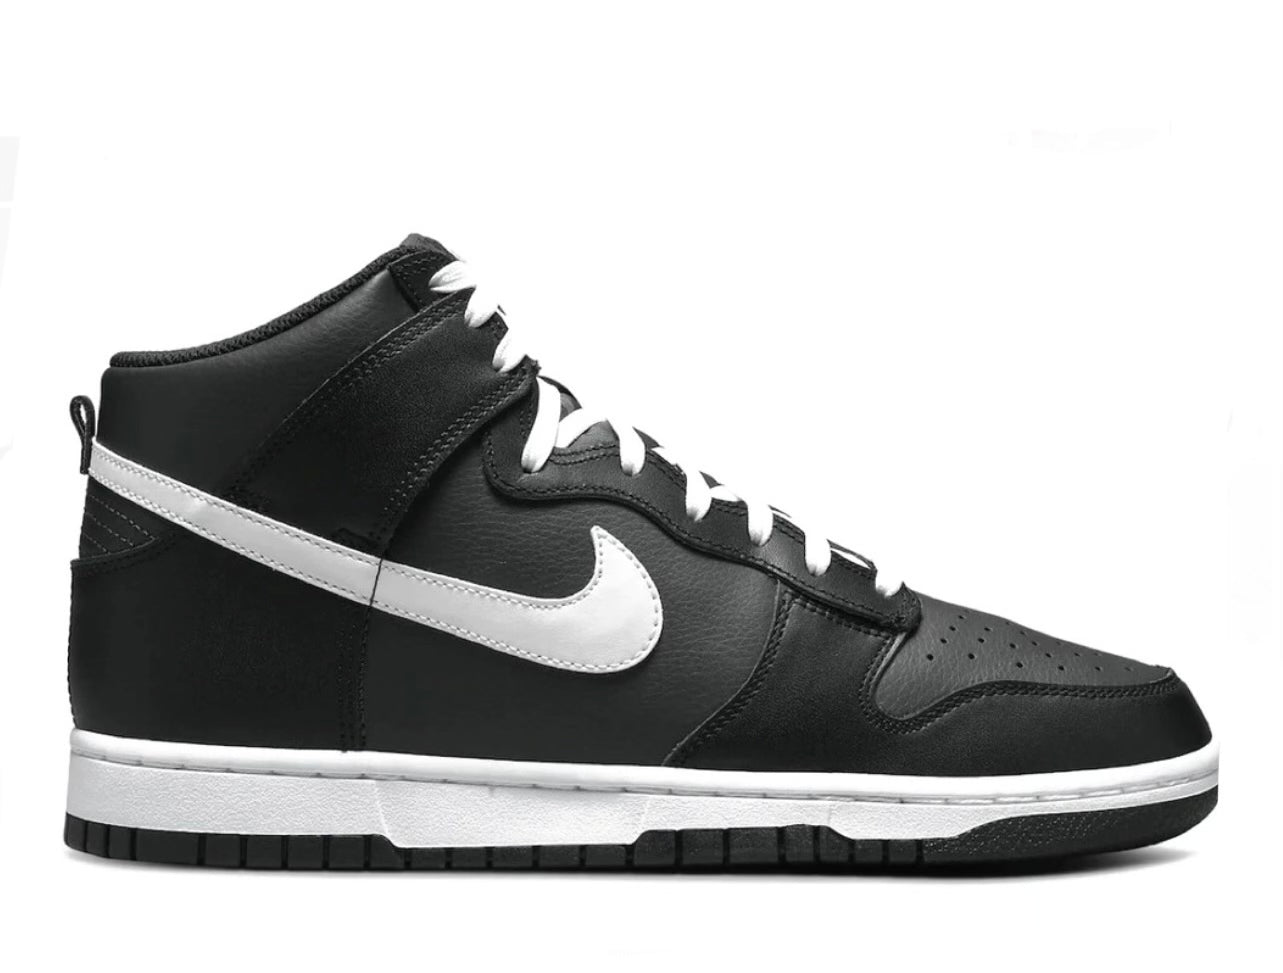 NIKE DUNK HIGH "ANTHRACITE WHITE" (GS)